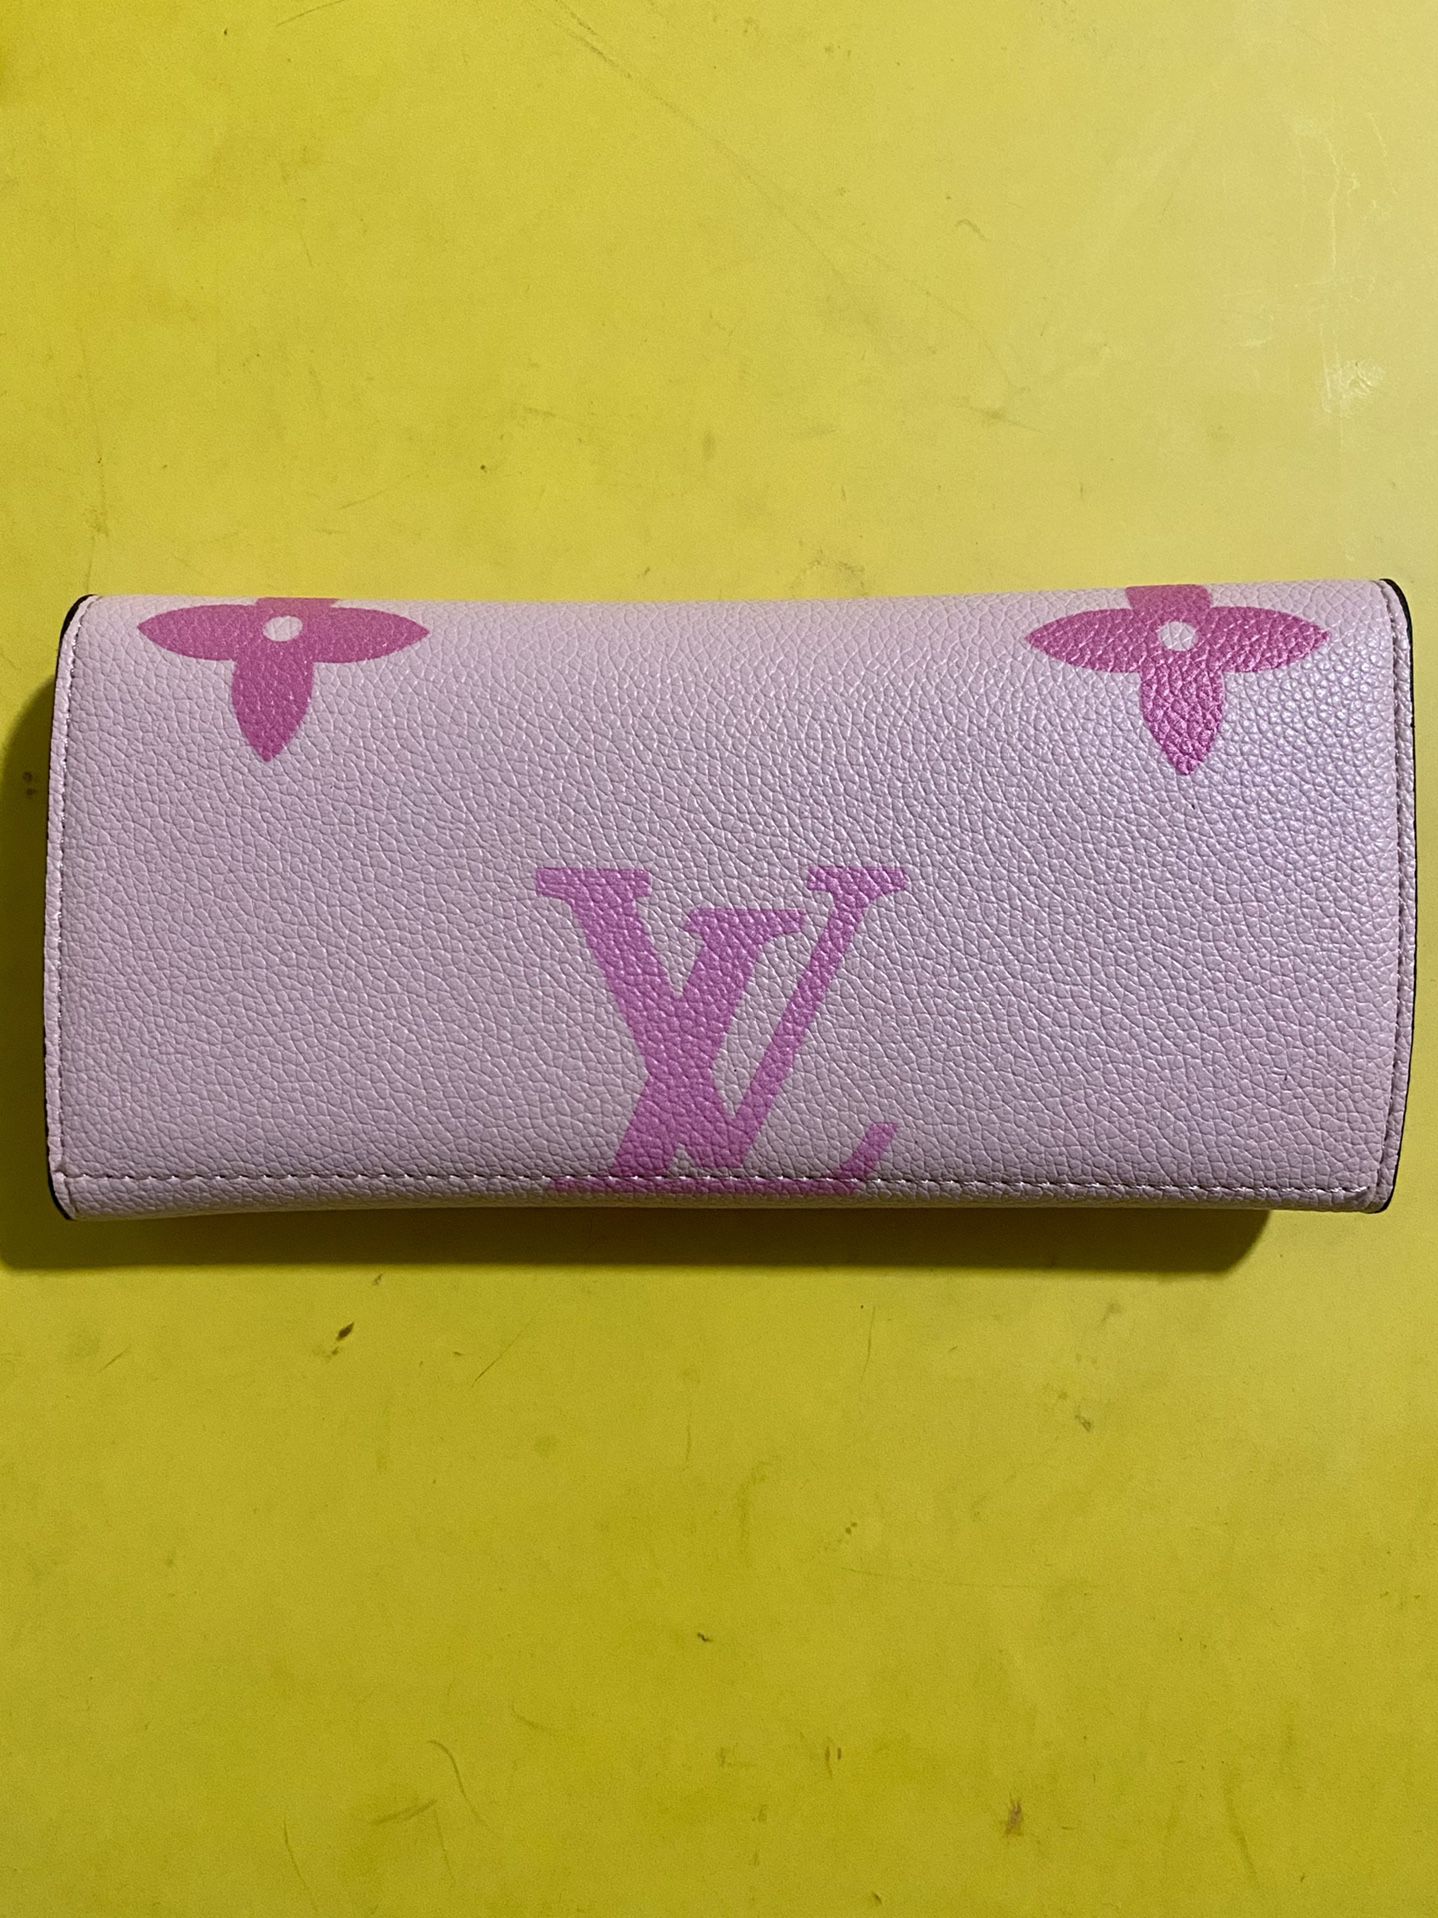 Lv Wallet White Pink Inside for Sale in Compton, CA - OfferUp